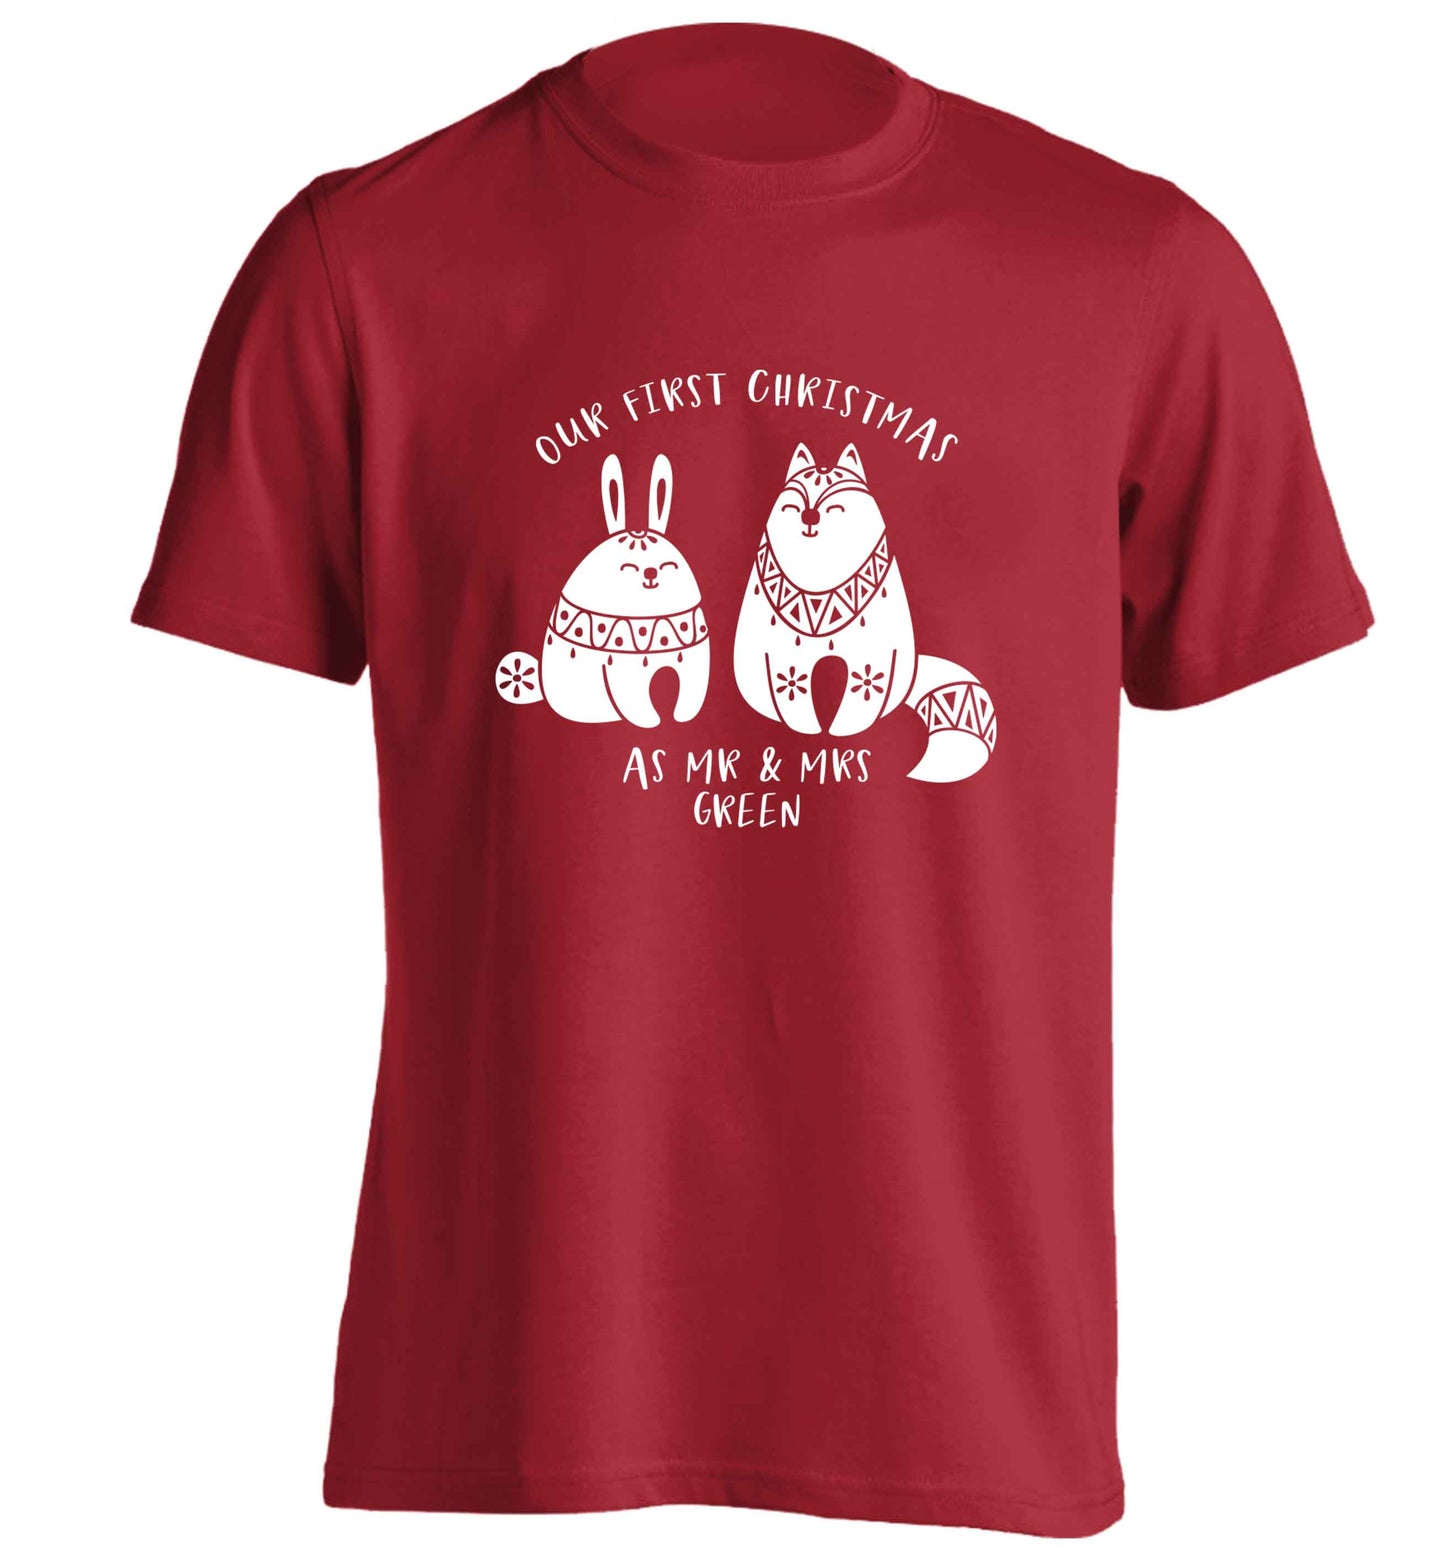 Our first Christmas as Mr & Mrs personalised adults unisex red Tshirt 2XL